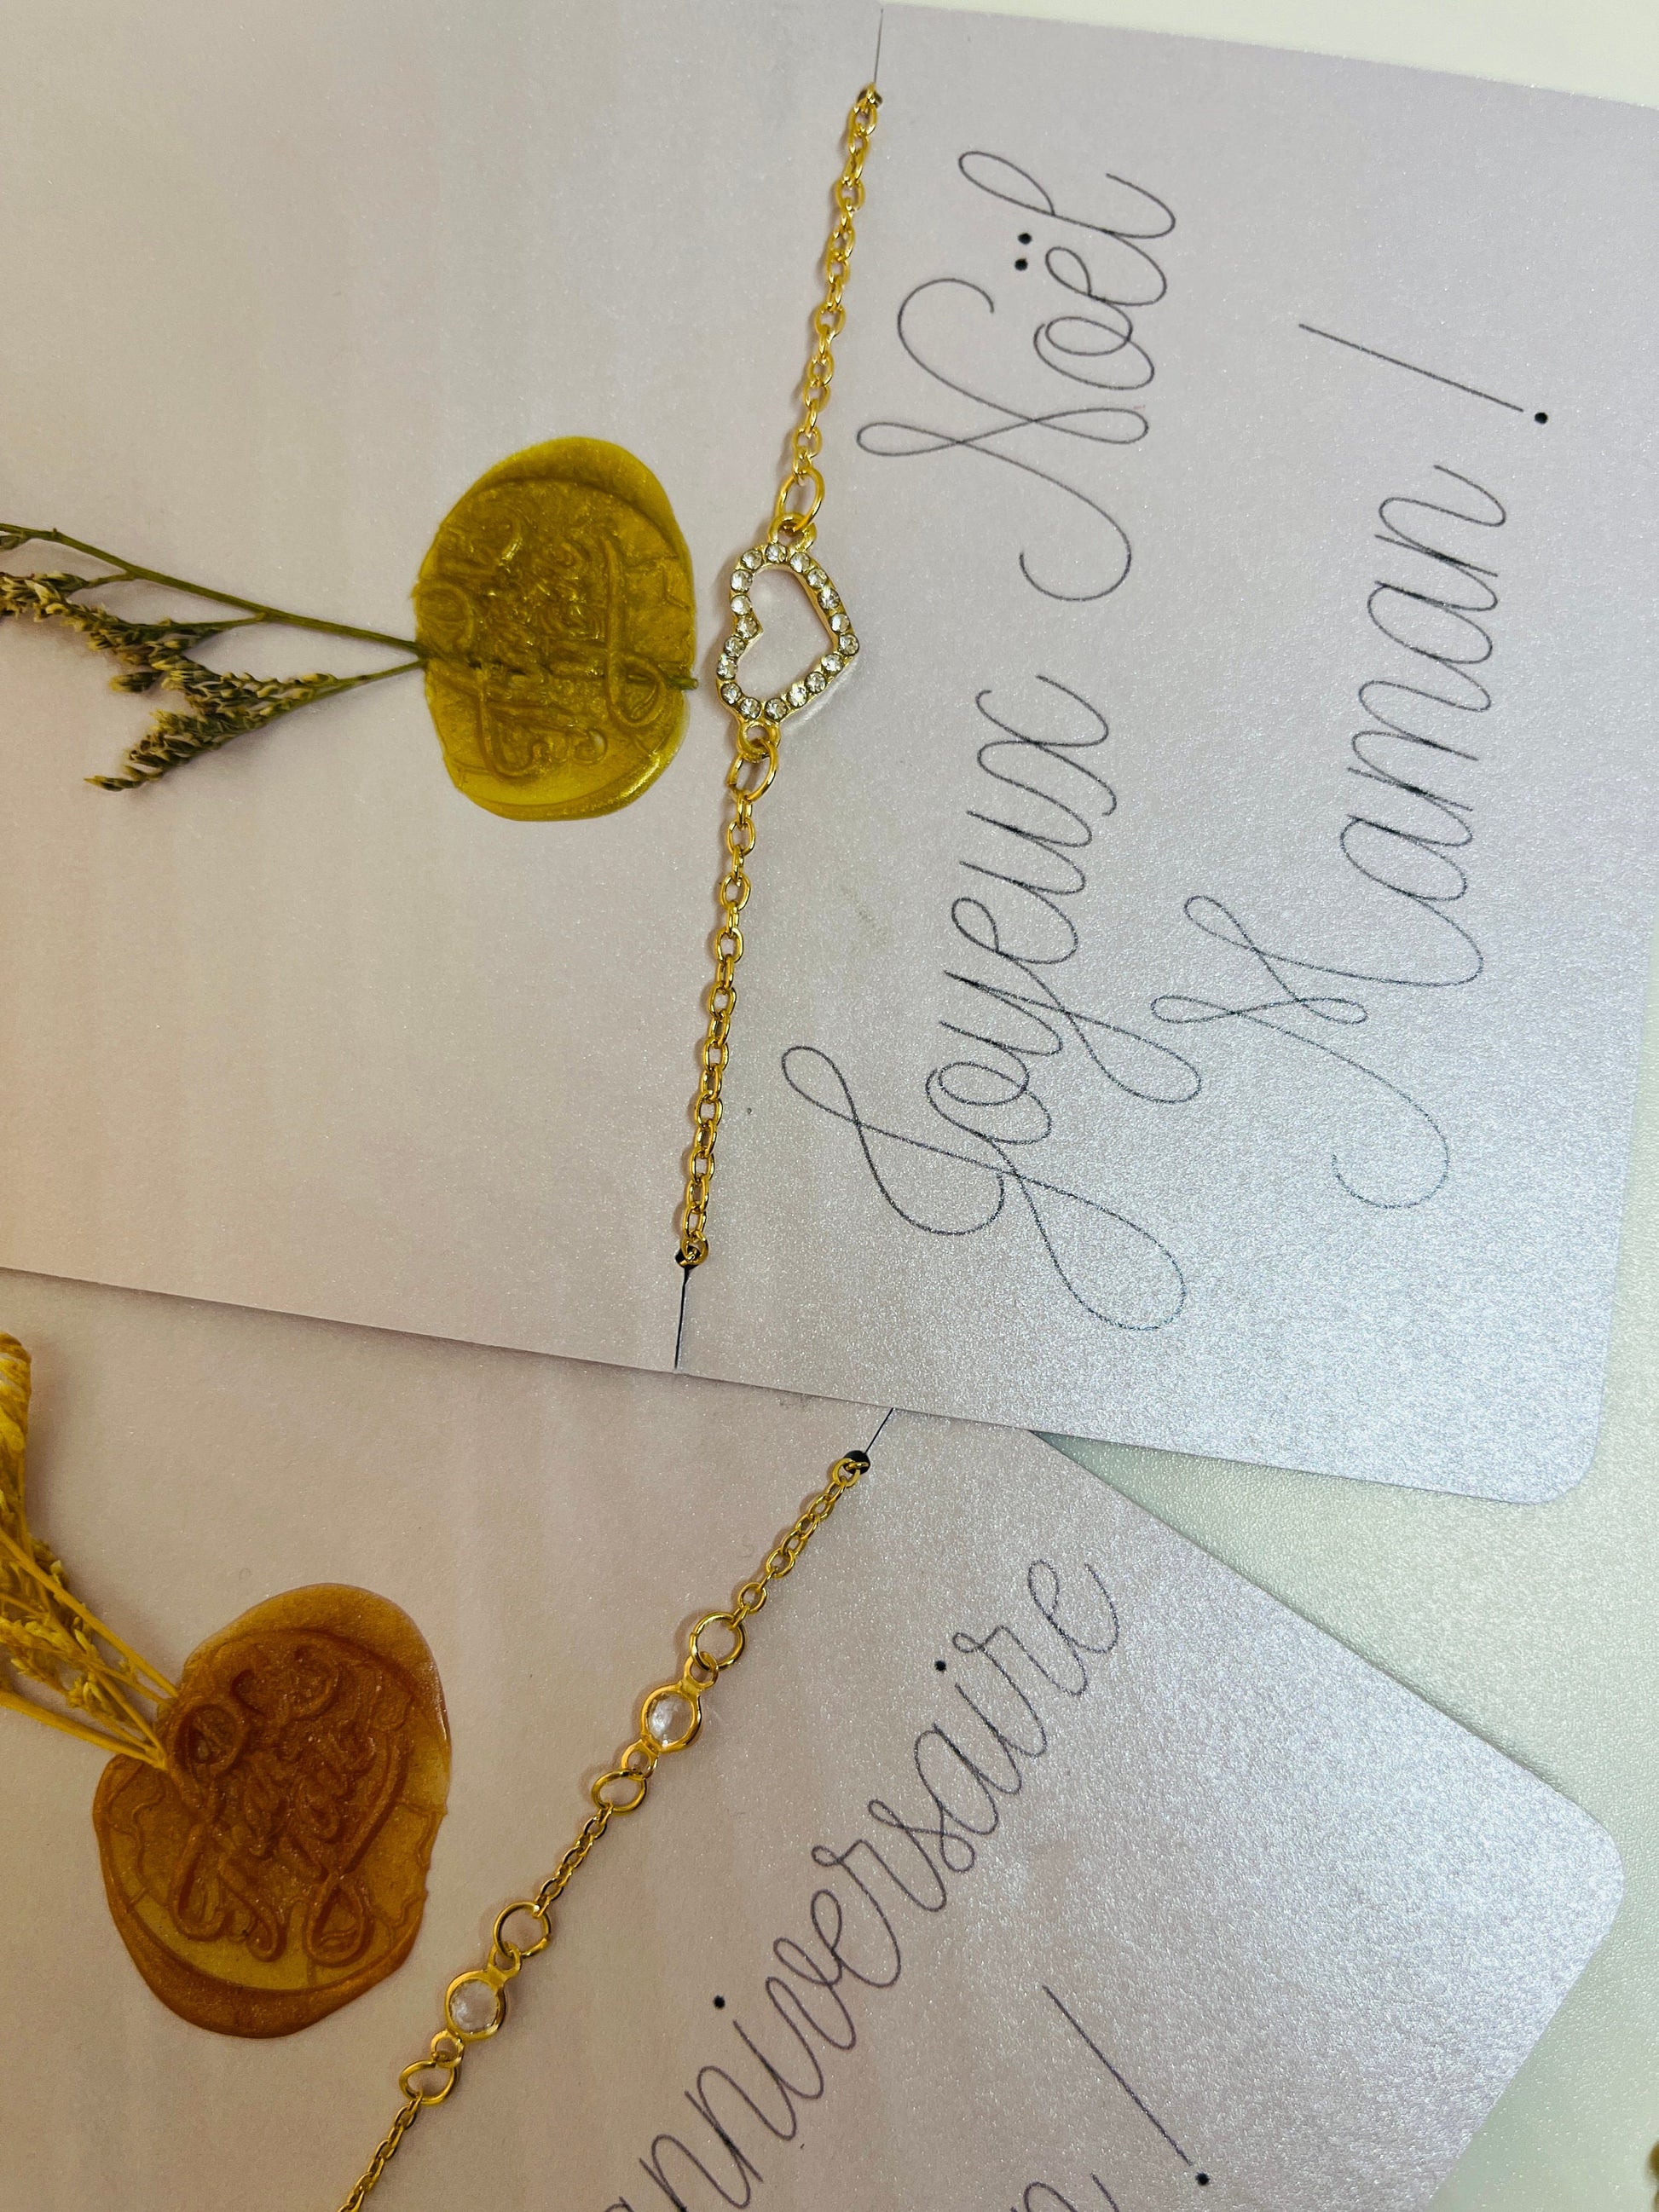 Personalized card and bracelet for all occasions, dried flowers and buckets